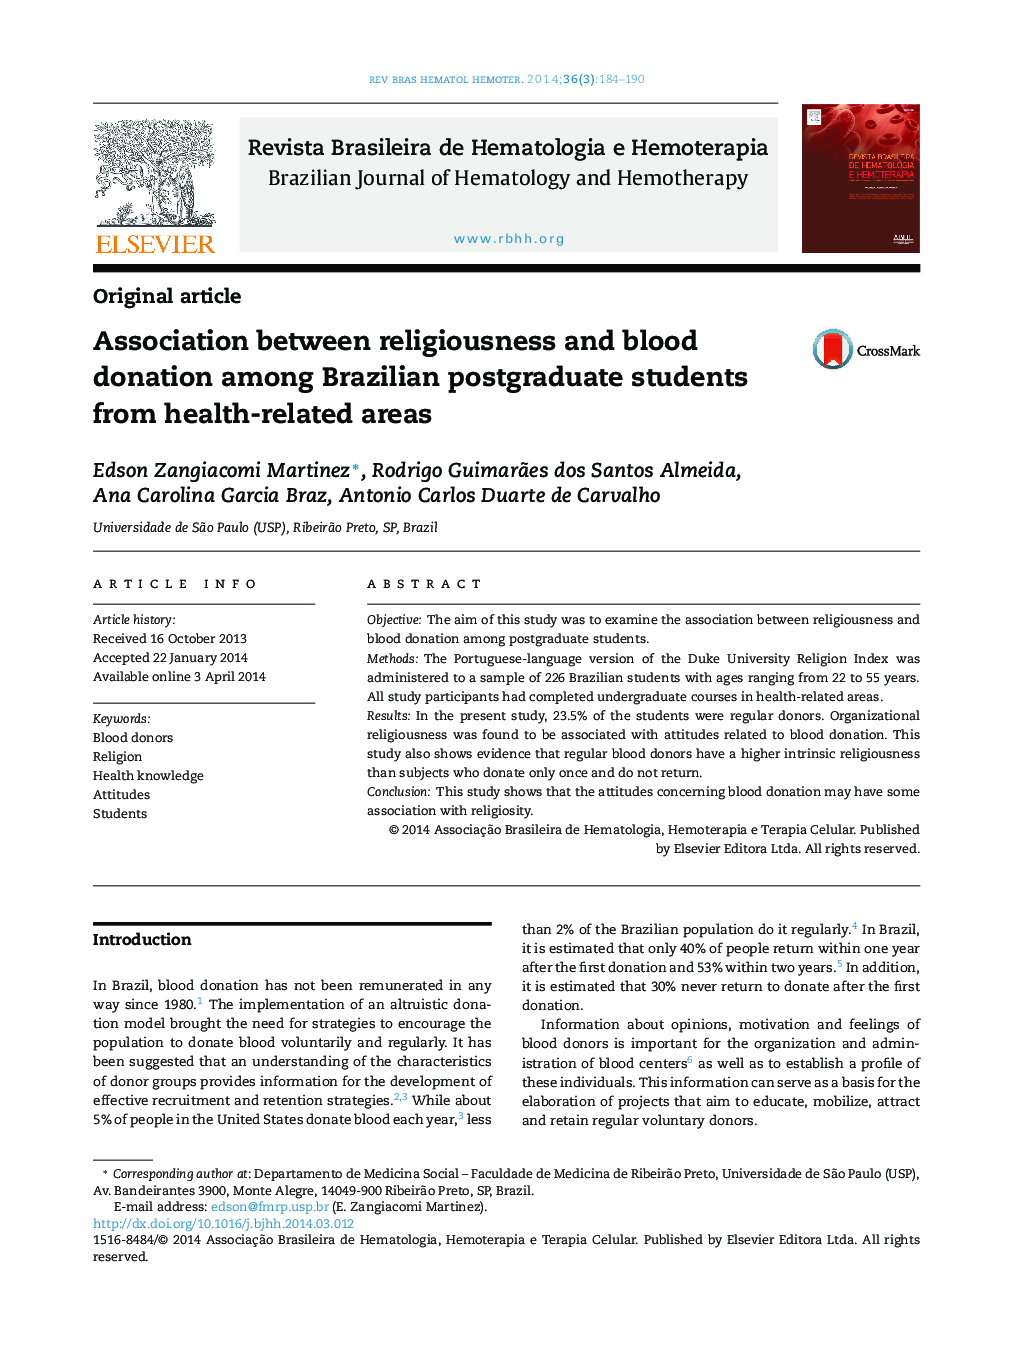 Association between religiousness and blood donation among Brazilian postgraduate students from health-related areas